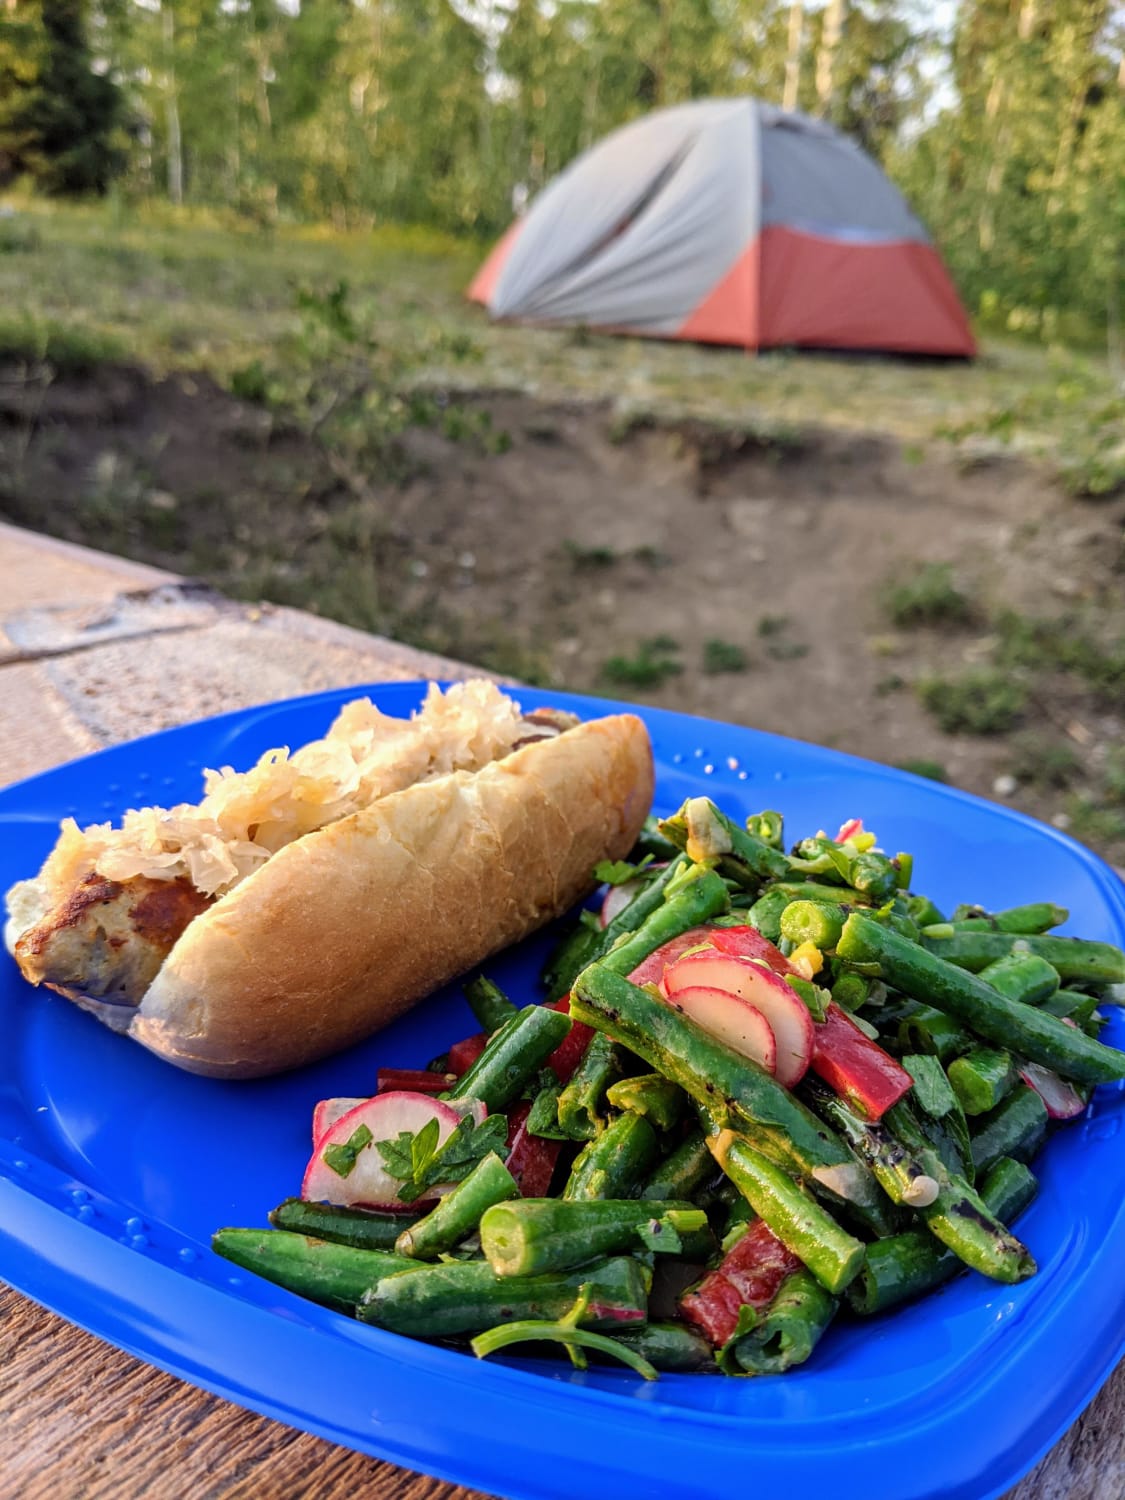 Kenjis Grilled Green Bean Salad With Red Peppers and Radishes. Turned out to be perfect for a campfire side. Easy to make and felt healthier than chips!